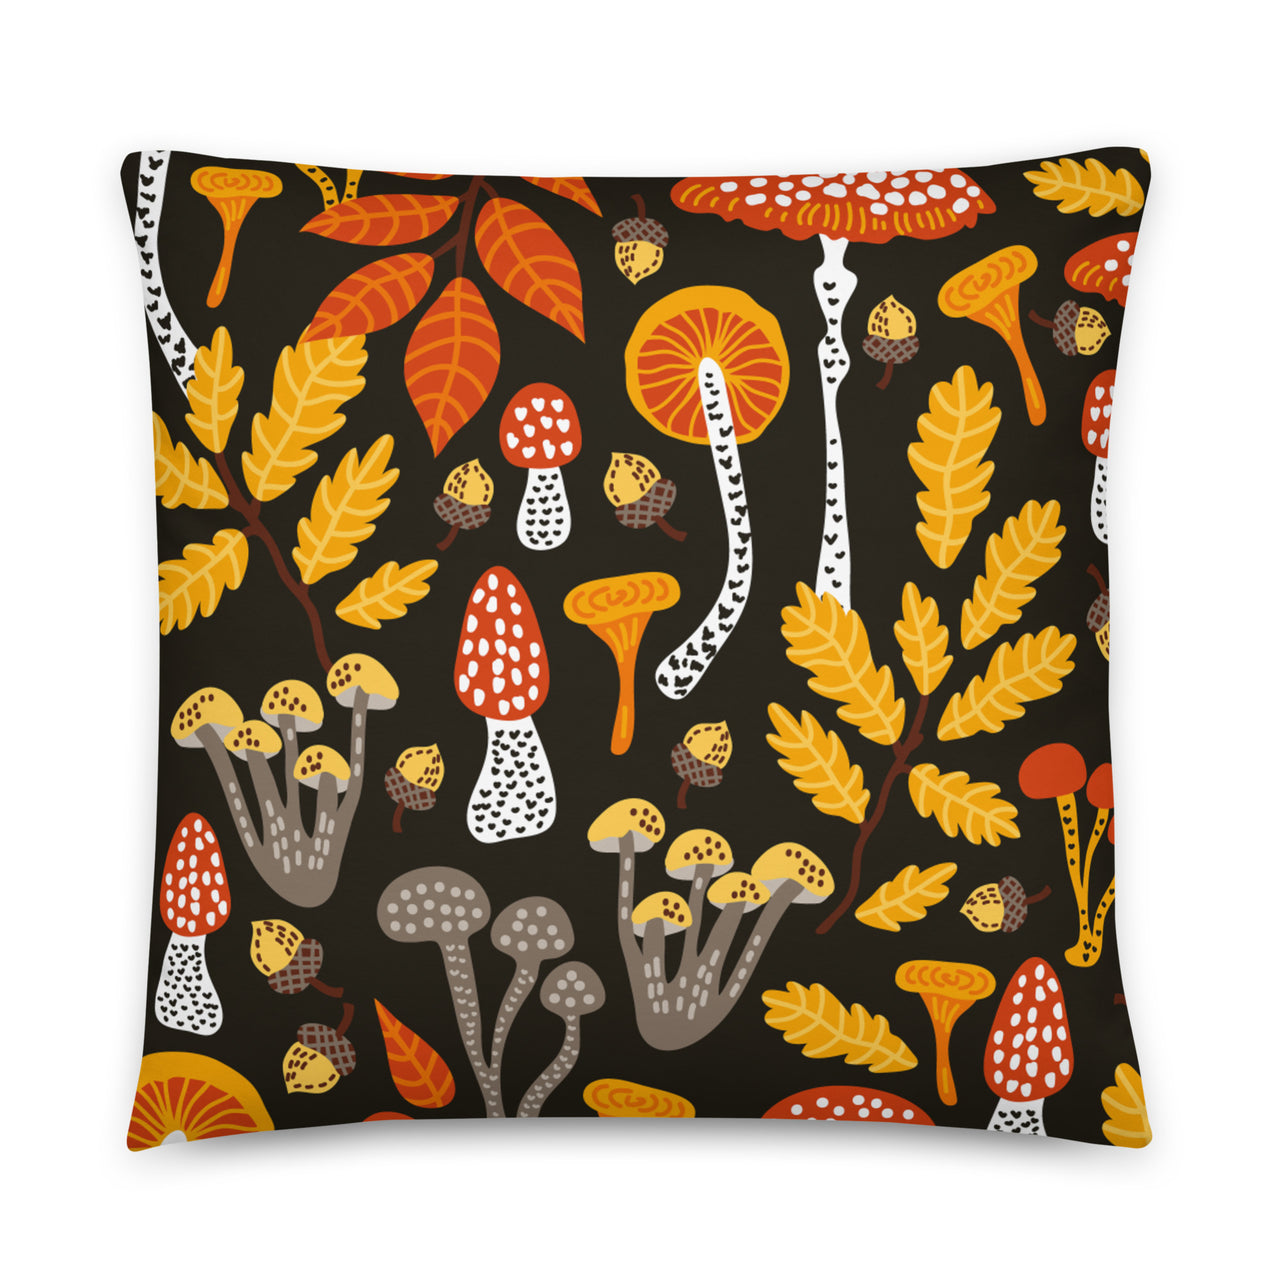 Mushrooms and Fall Leaves Pillow